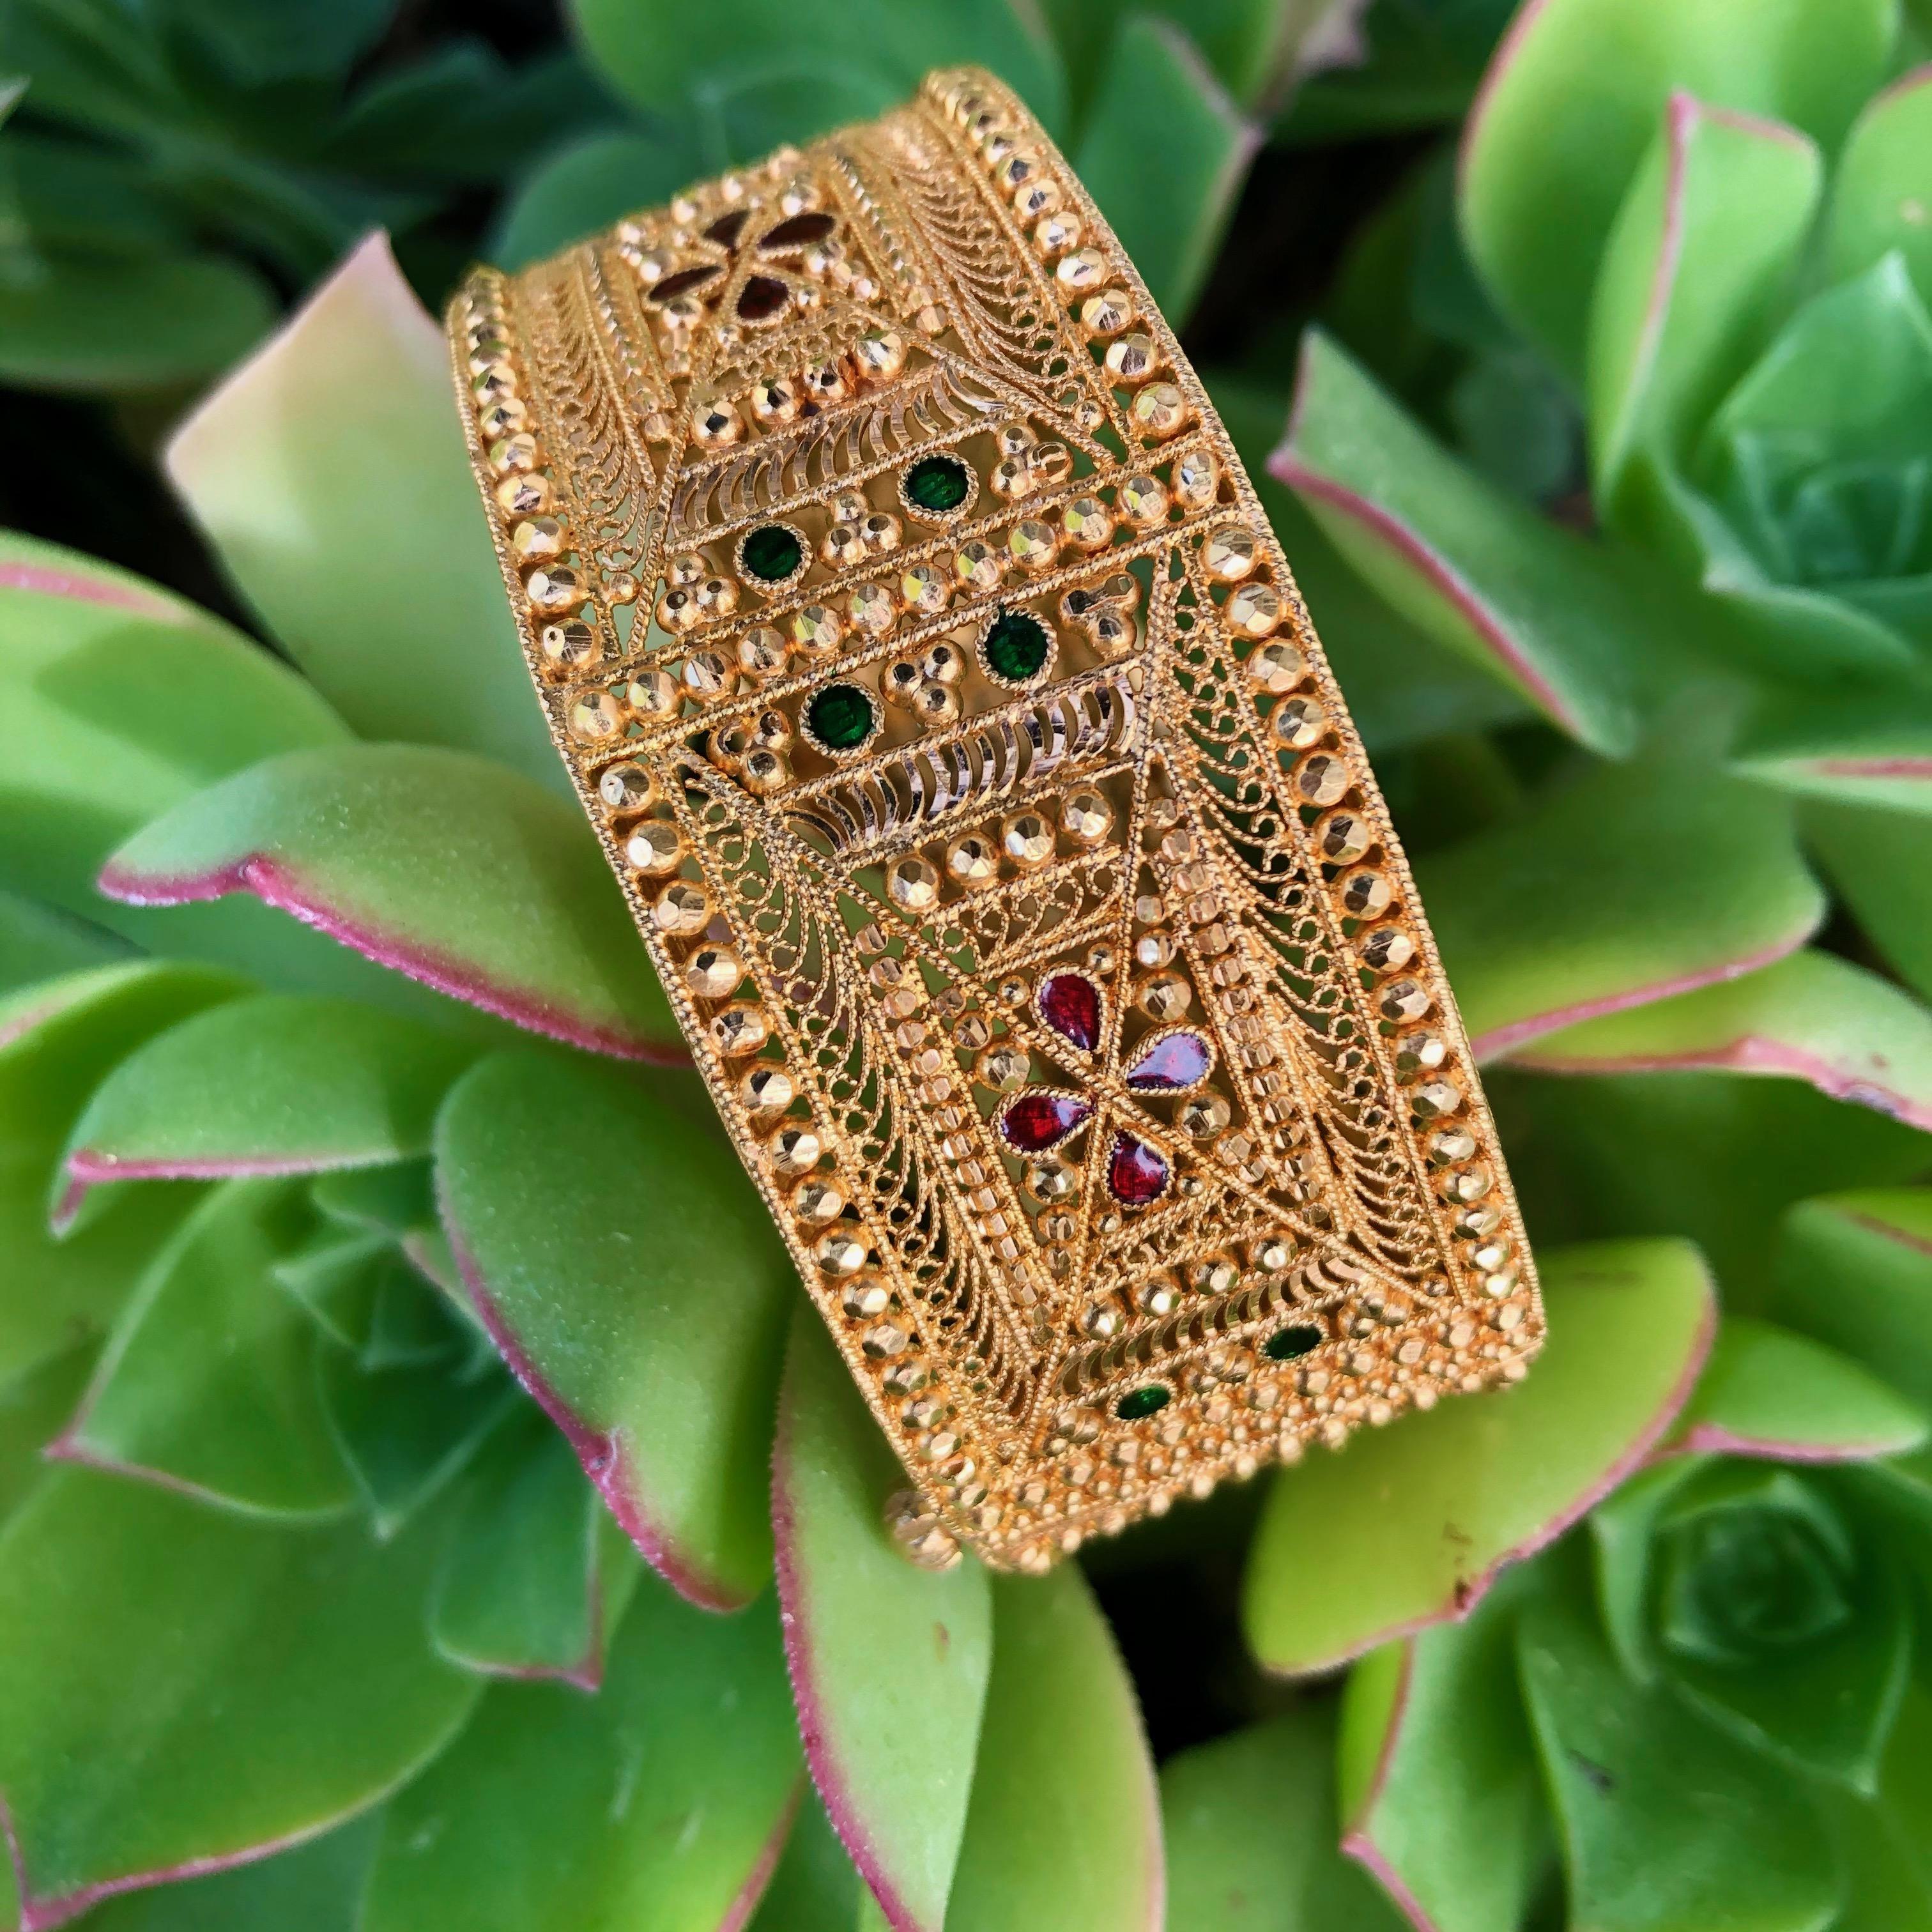 Lovely estate Middle Eastern style bracelet made in 21 karat yellow gold. The bracelet has ornate design with filigree work, faceted beading, hand engraved edges and small areas of Red & Green Enamel work. The bracelet measures 25mm wide, clasp is a